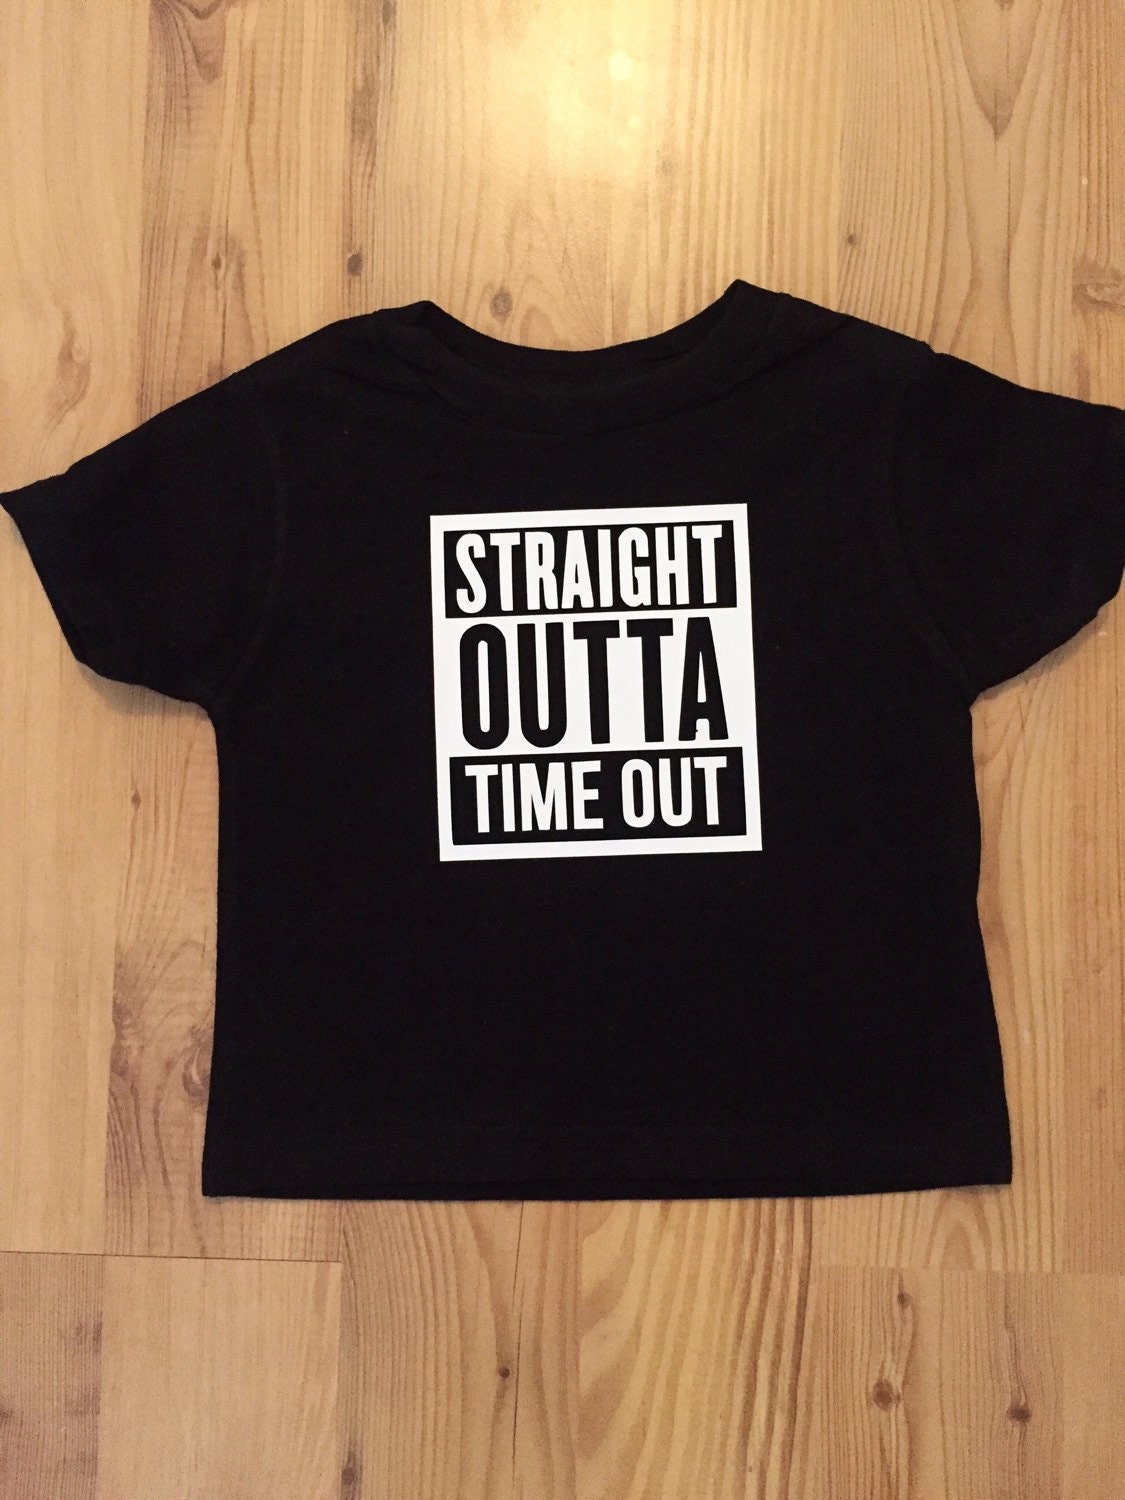 Straight Outta Time Out Shirt Kid's Graphic Tee by MaywindMarket